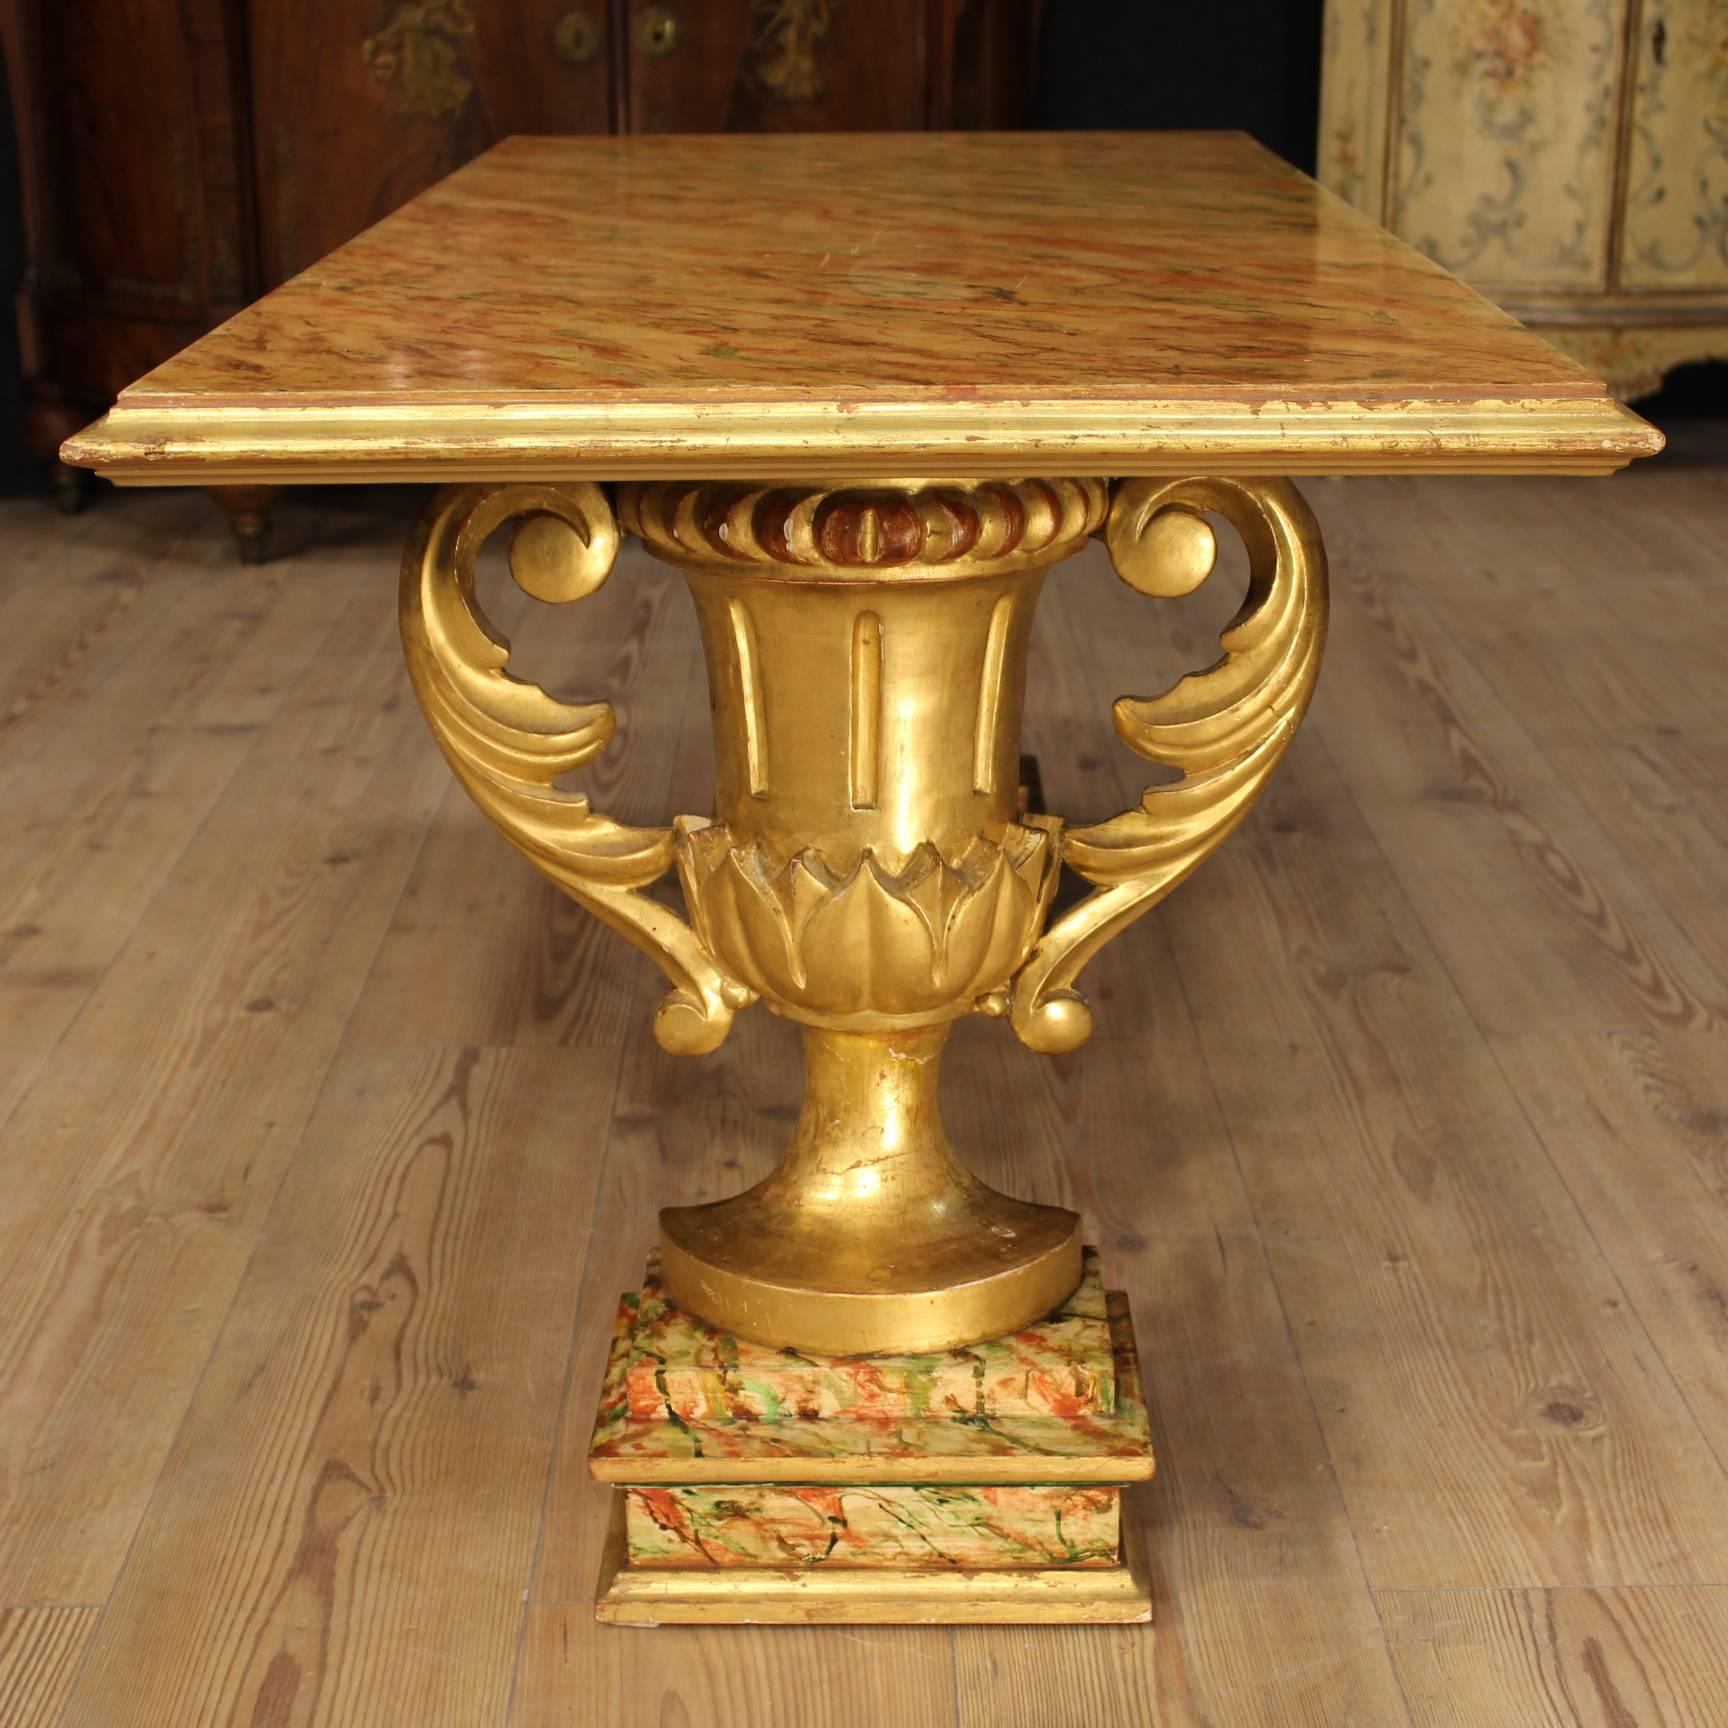 Gilded, lacquered and painted by hand coffee table of the 20th century. Furniture of good stability supported by two special cupped legs made by carved and gilded wood. Lacquered faux marble top, of great decoration. Decorations in wrought iron on